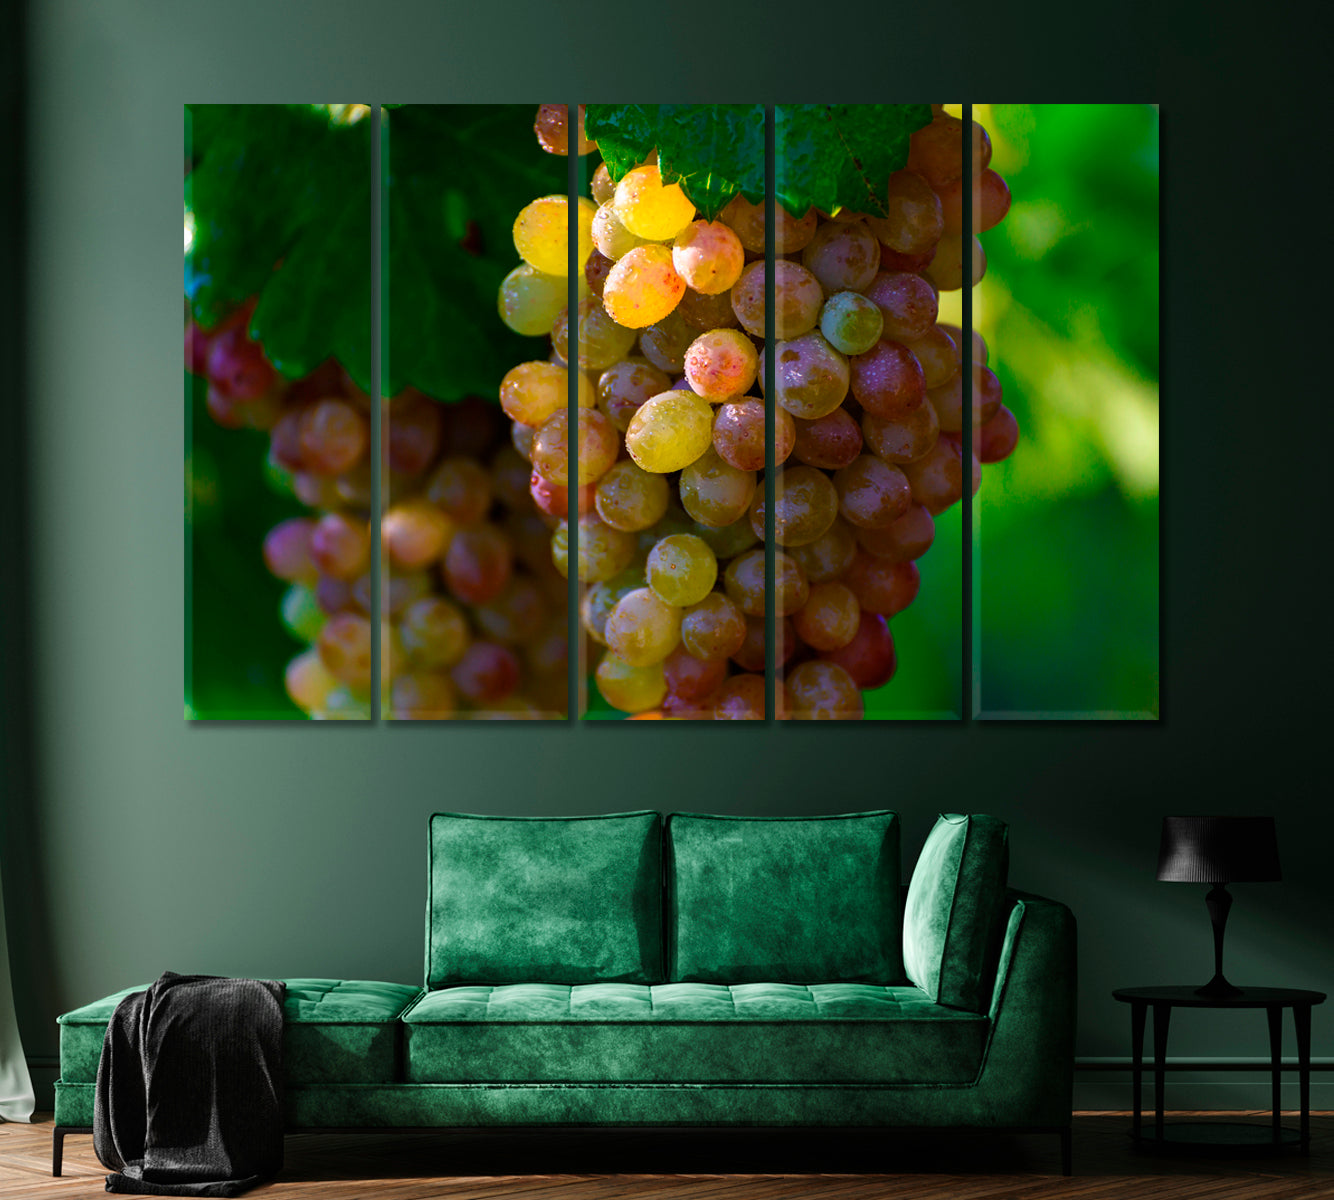 Morning Dew with Sunbeams on Bunches Grapes Canvas Print-Canvas Print-CetArt-1 Panel-24x16 inches-CetArt